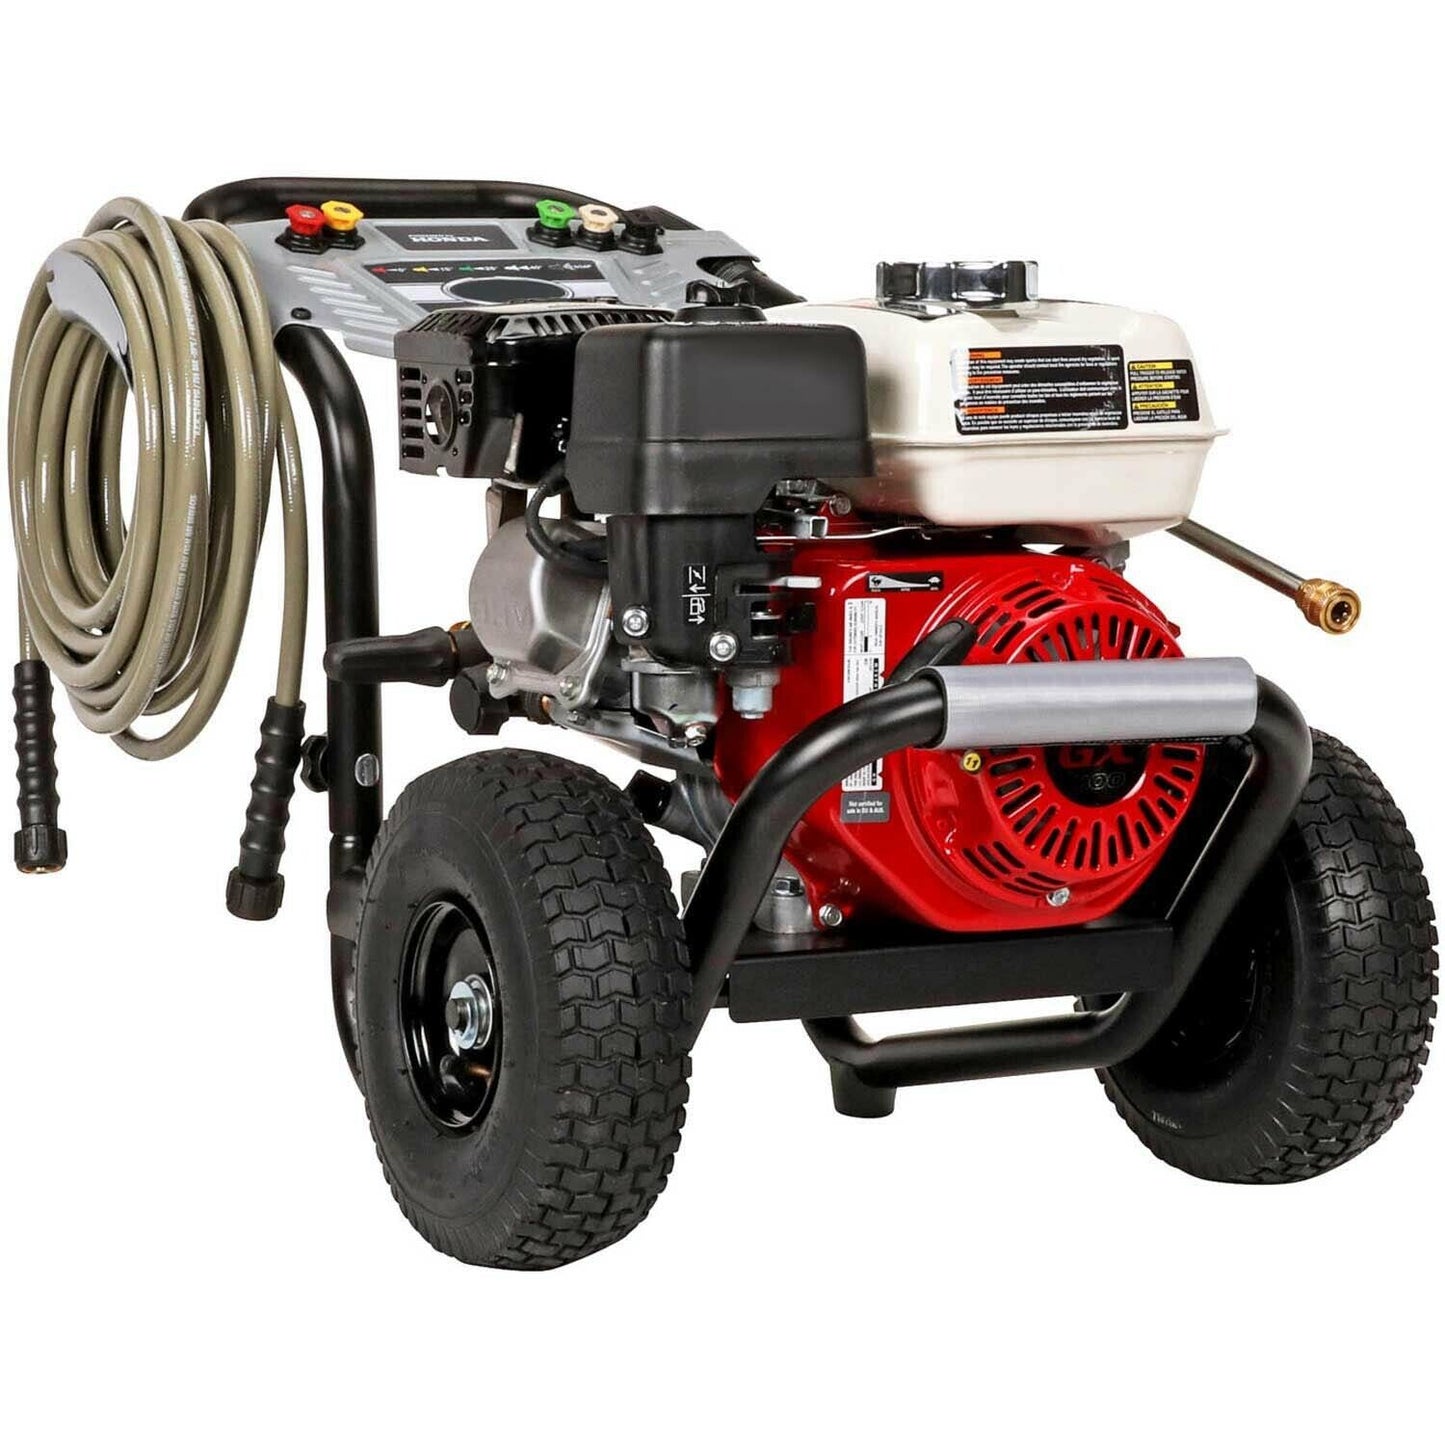 Gas Pressure Washer - Cold Water - 3500 PSI - 2.5 GPM - AAA Pump - Honda Engine